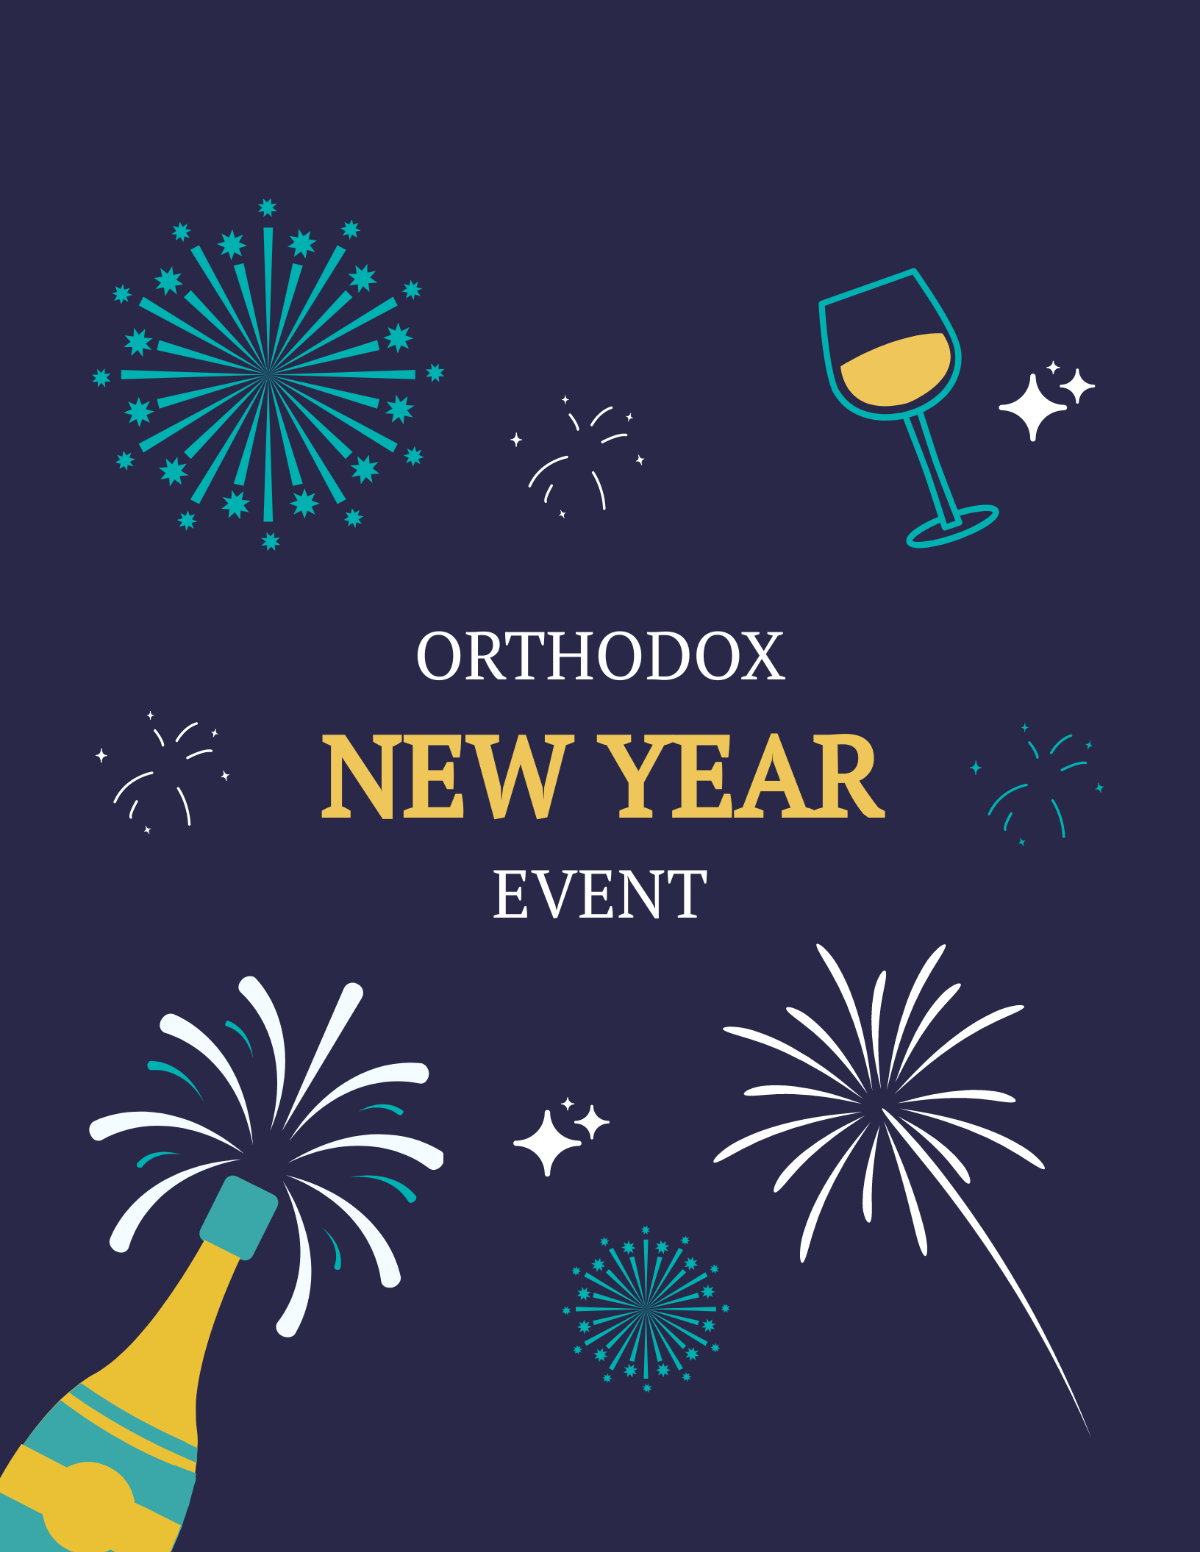 Orthodox New Year Event Flyer